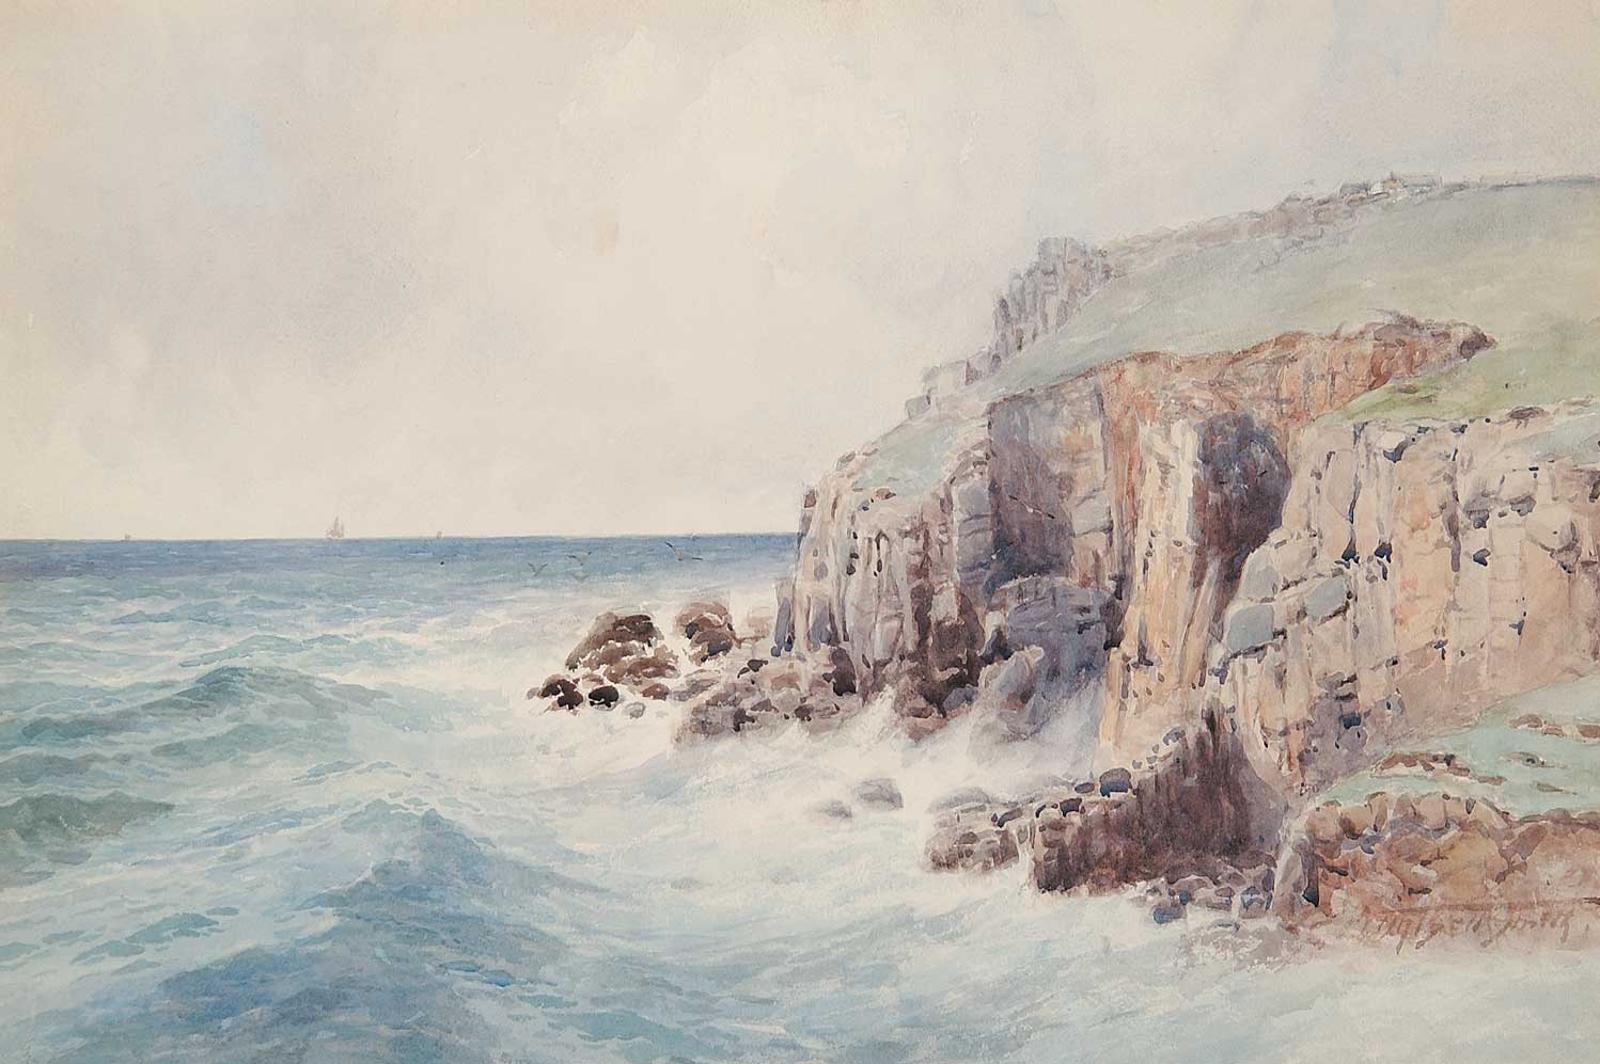 Frederic Martlett Bell-Smith (1846-1923) - Sailing Off a Rocky Coast